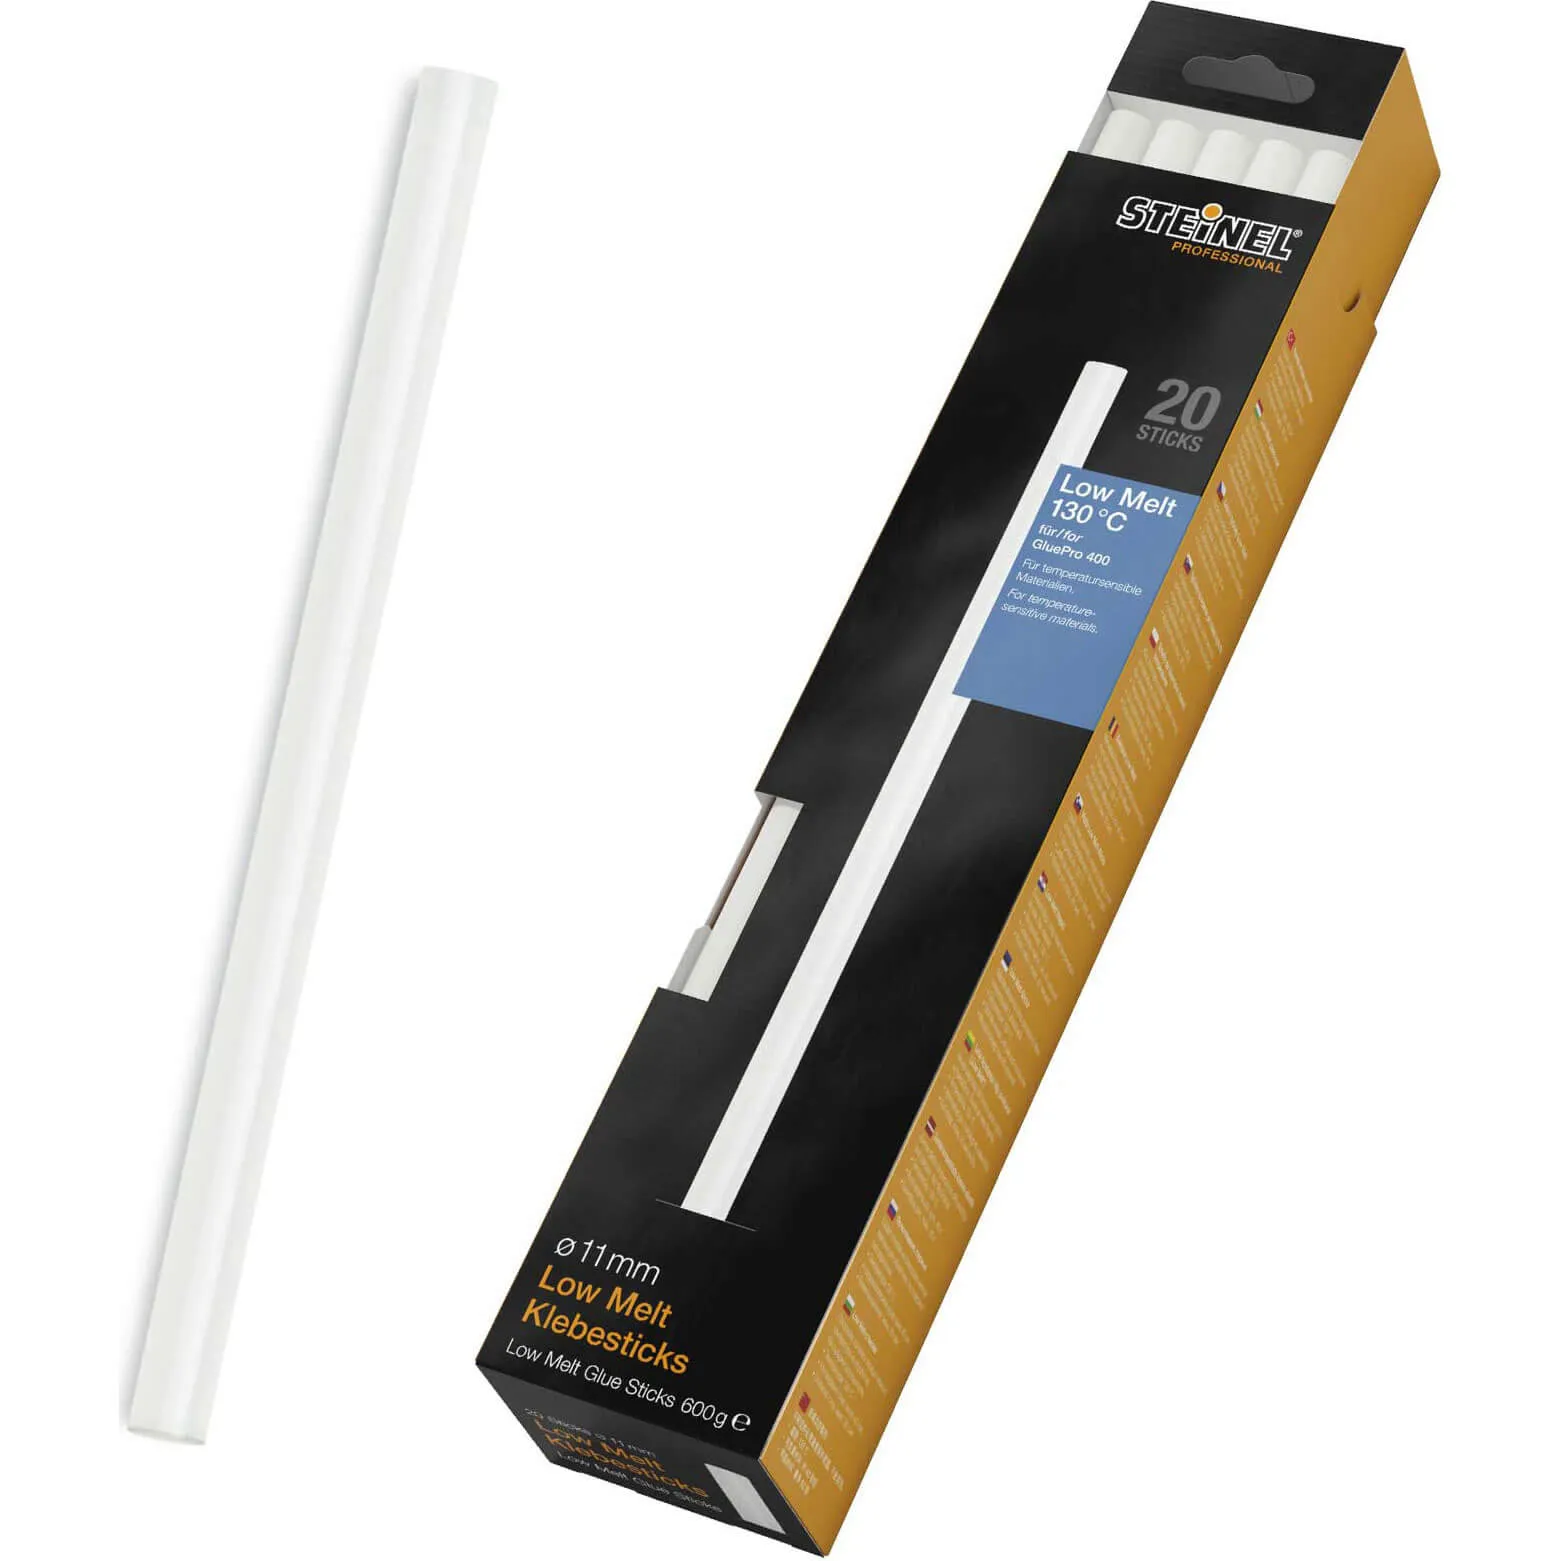 Steinel Professional Low Melt Glue Sticks for GluePRO 400 LCD - 11mm, 250mm, Pack of 20